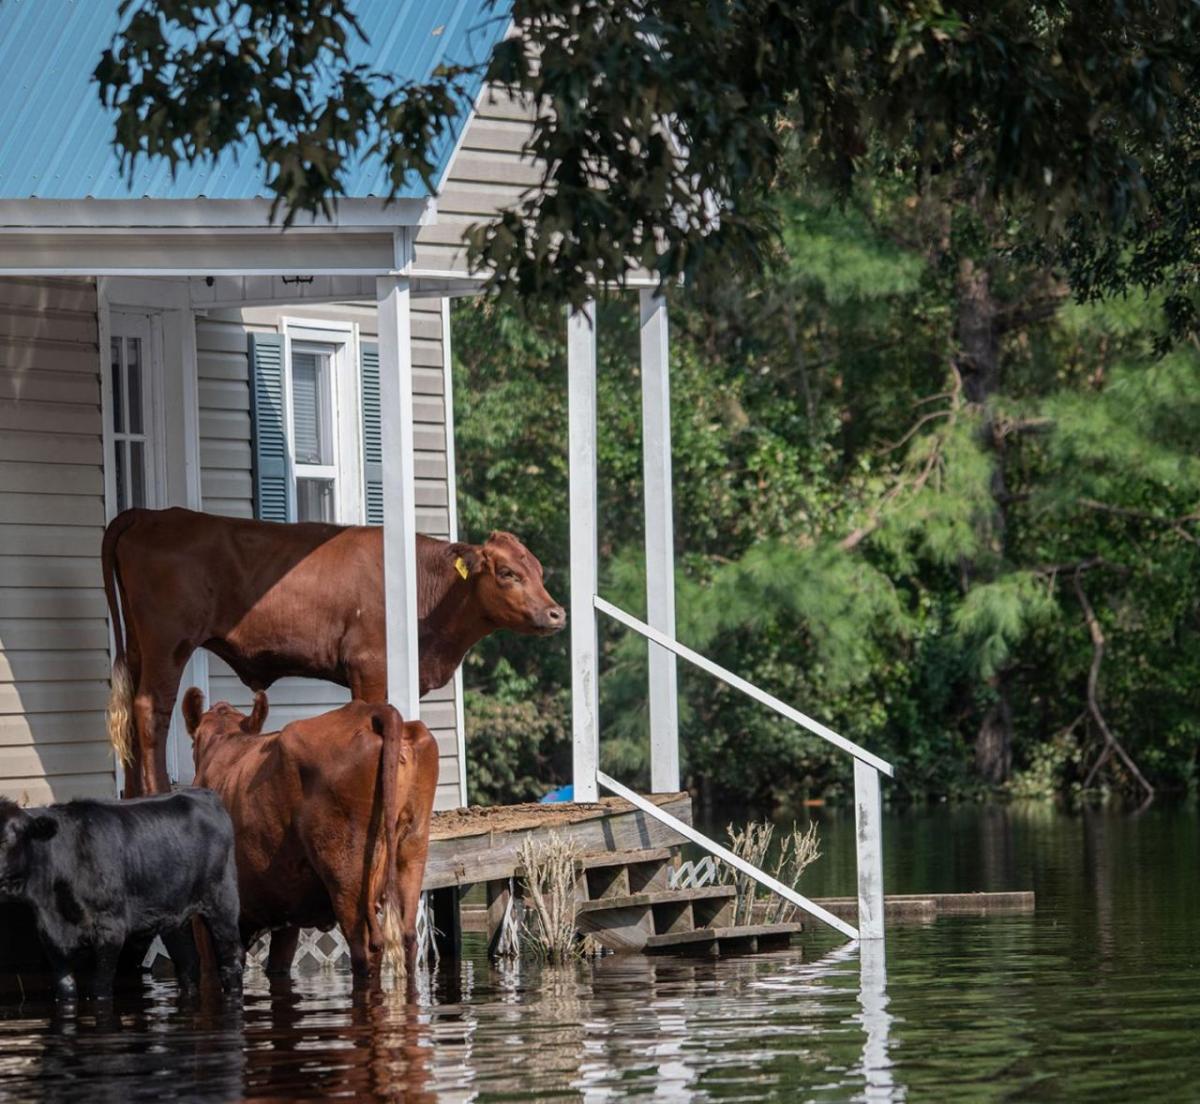 Cows in a flooded yard